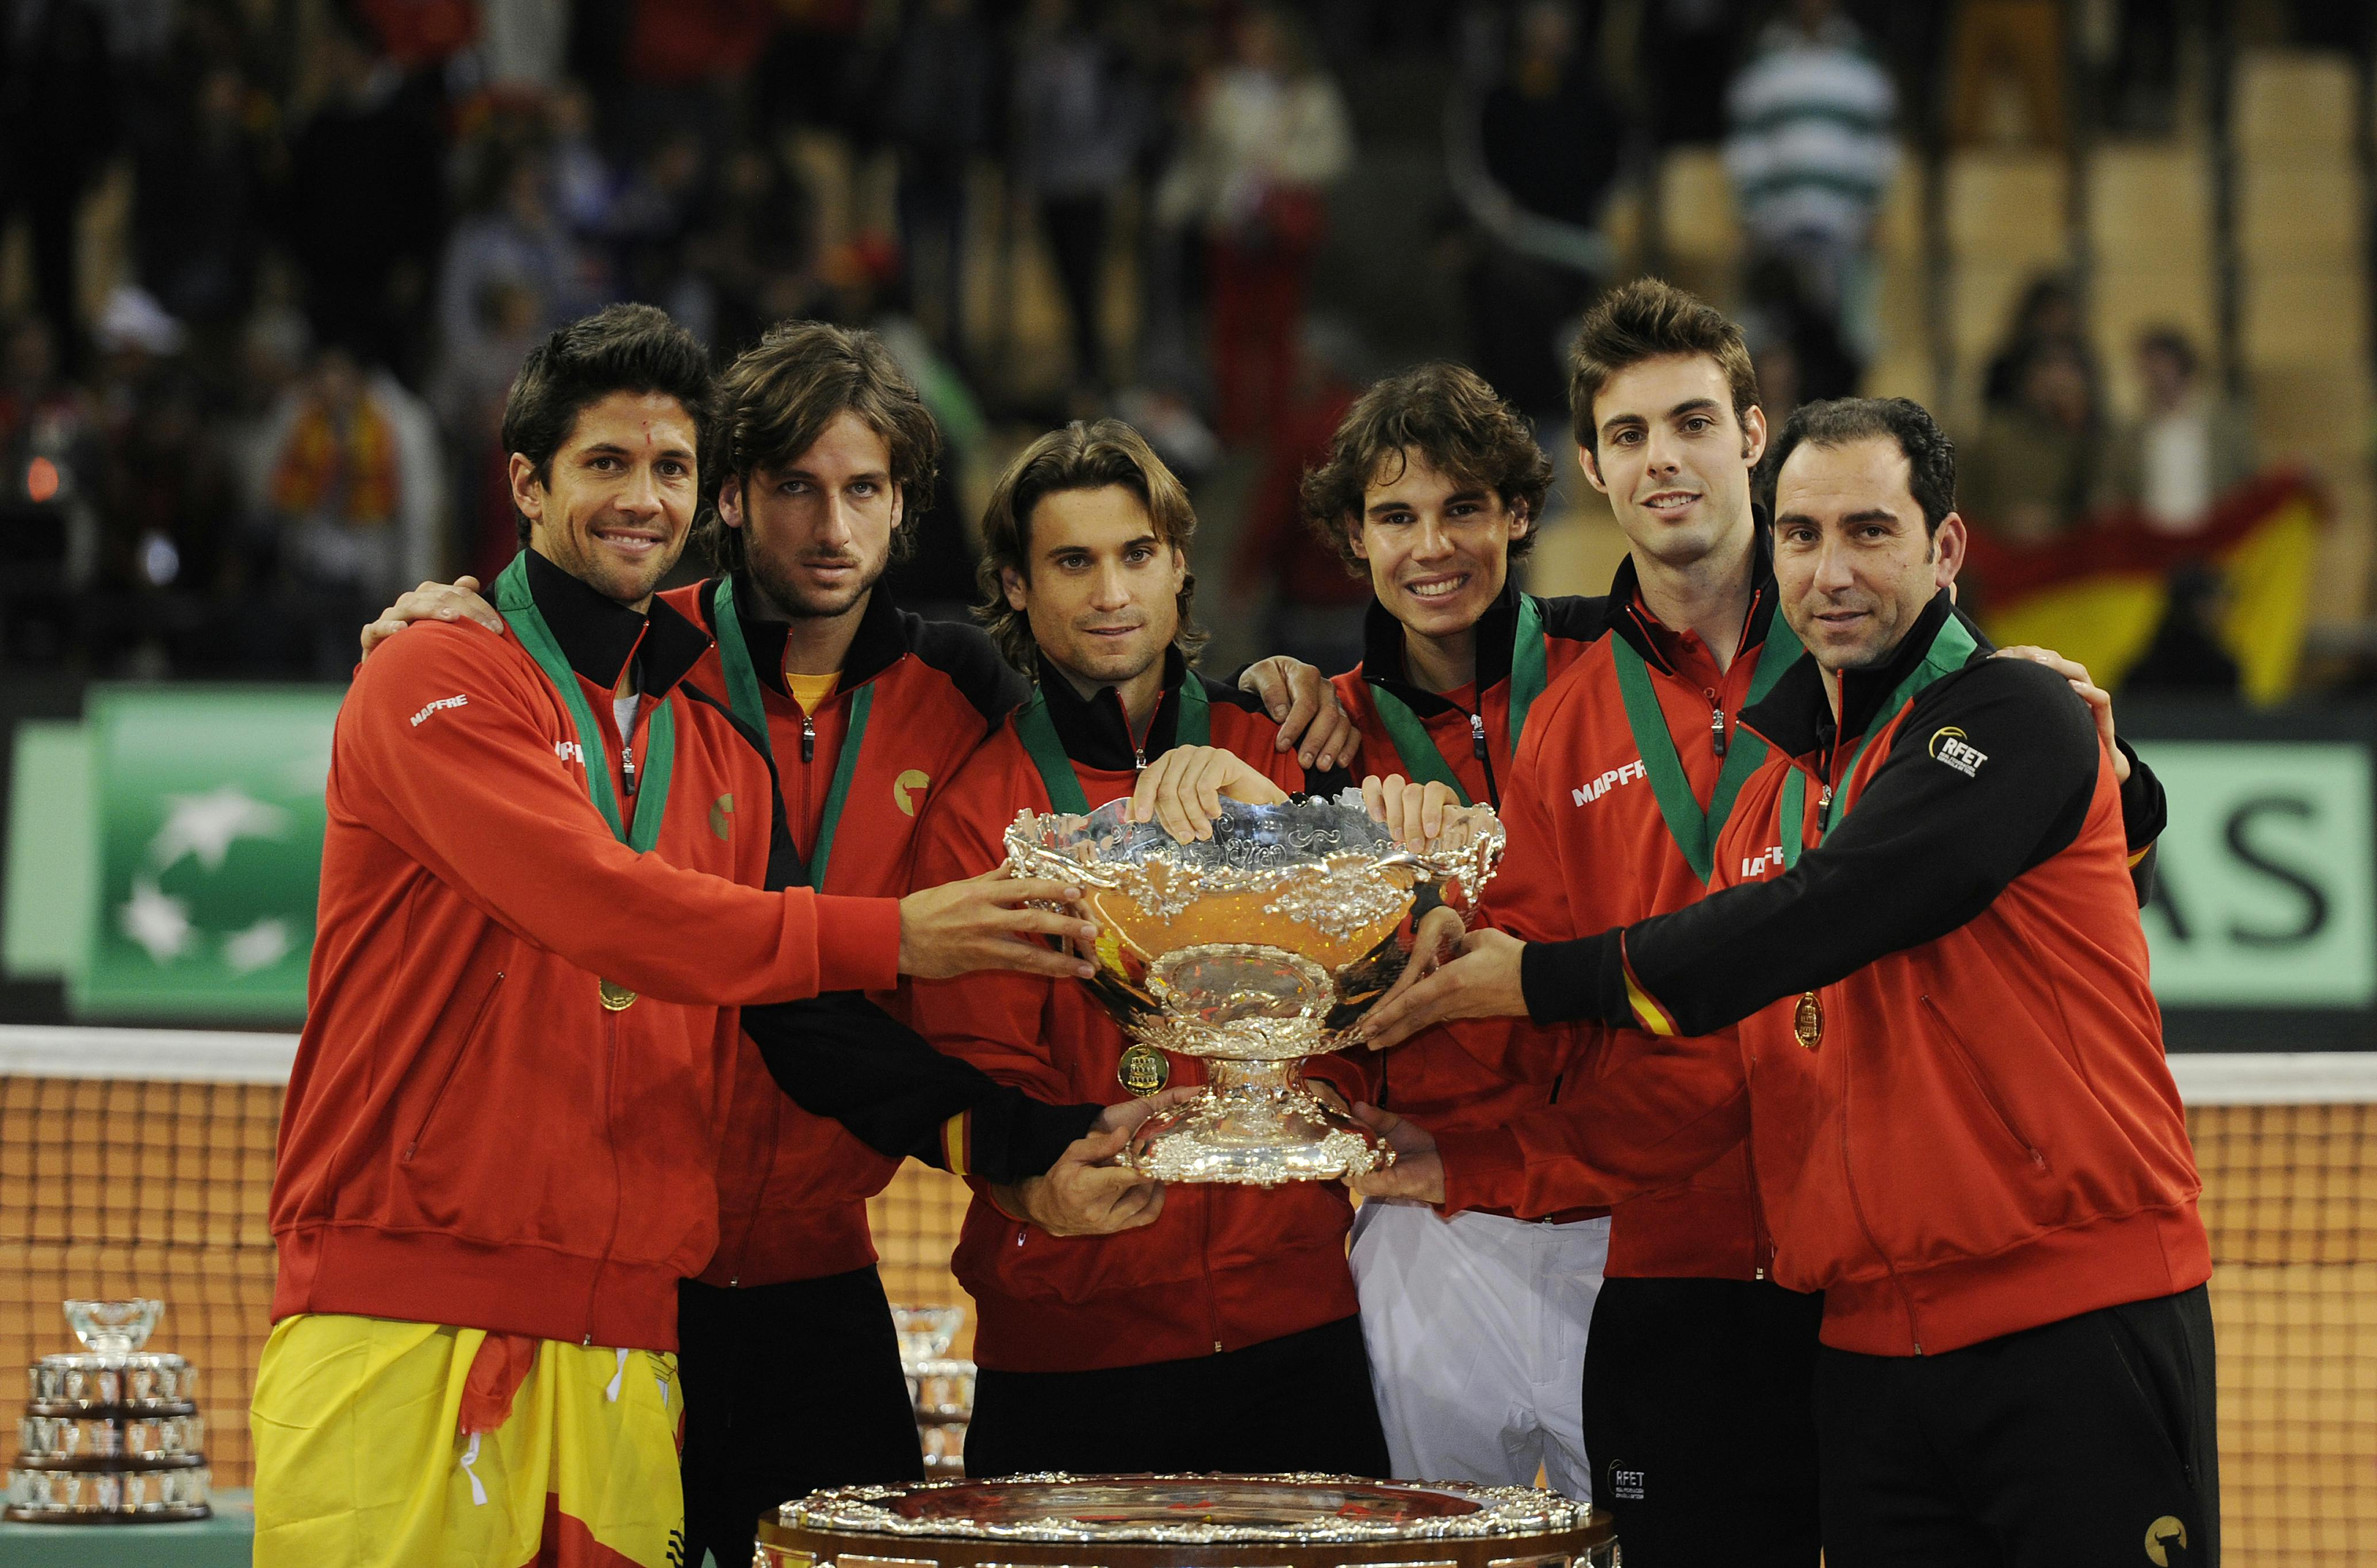 Ferrer and Costa, members of the Spanish Davis Cup winning team in 2011